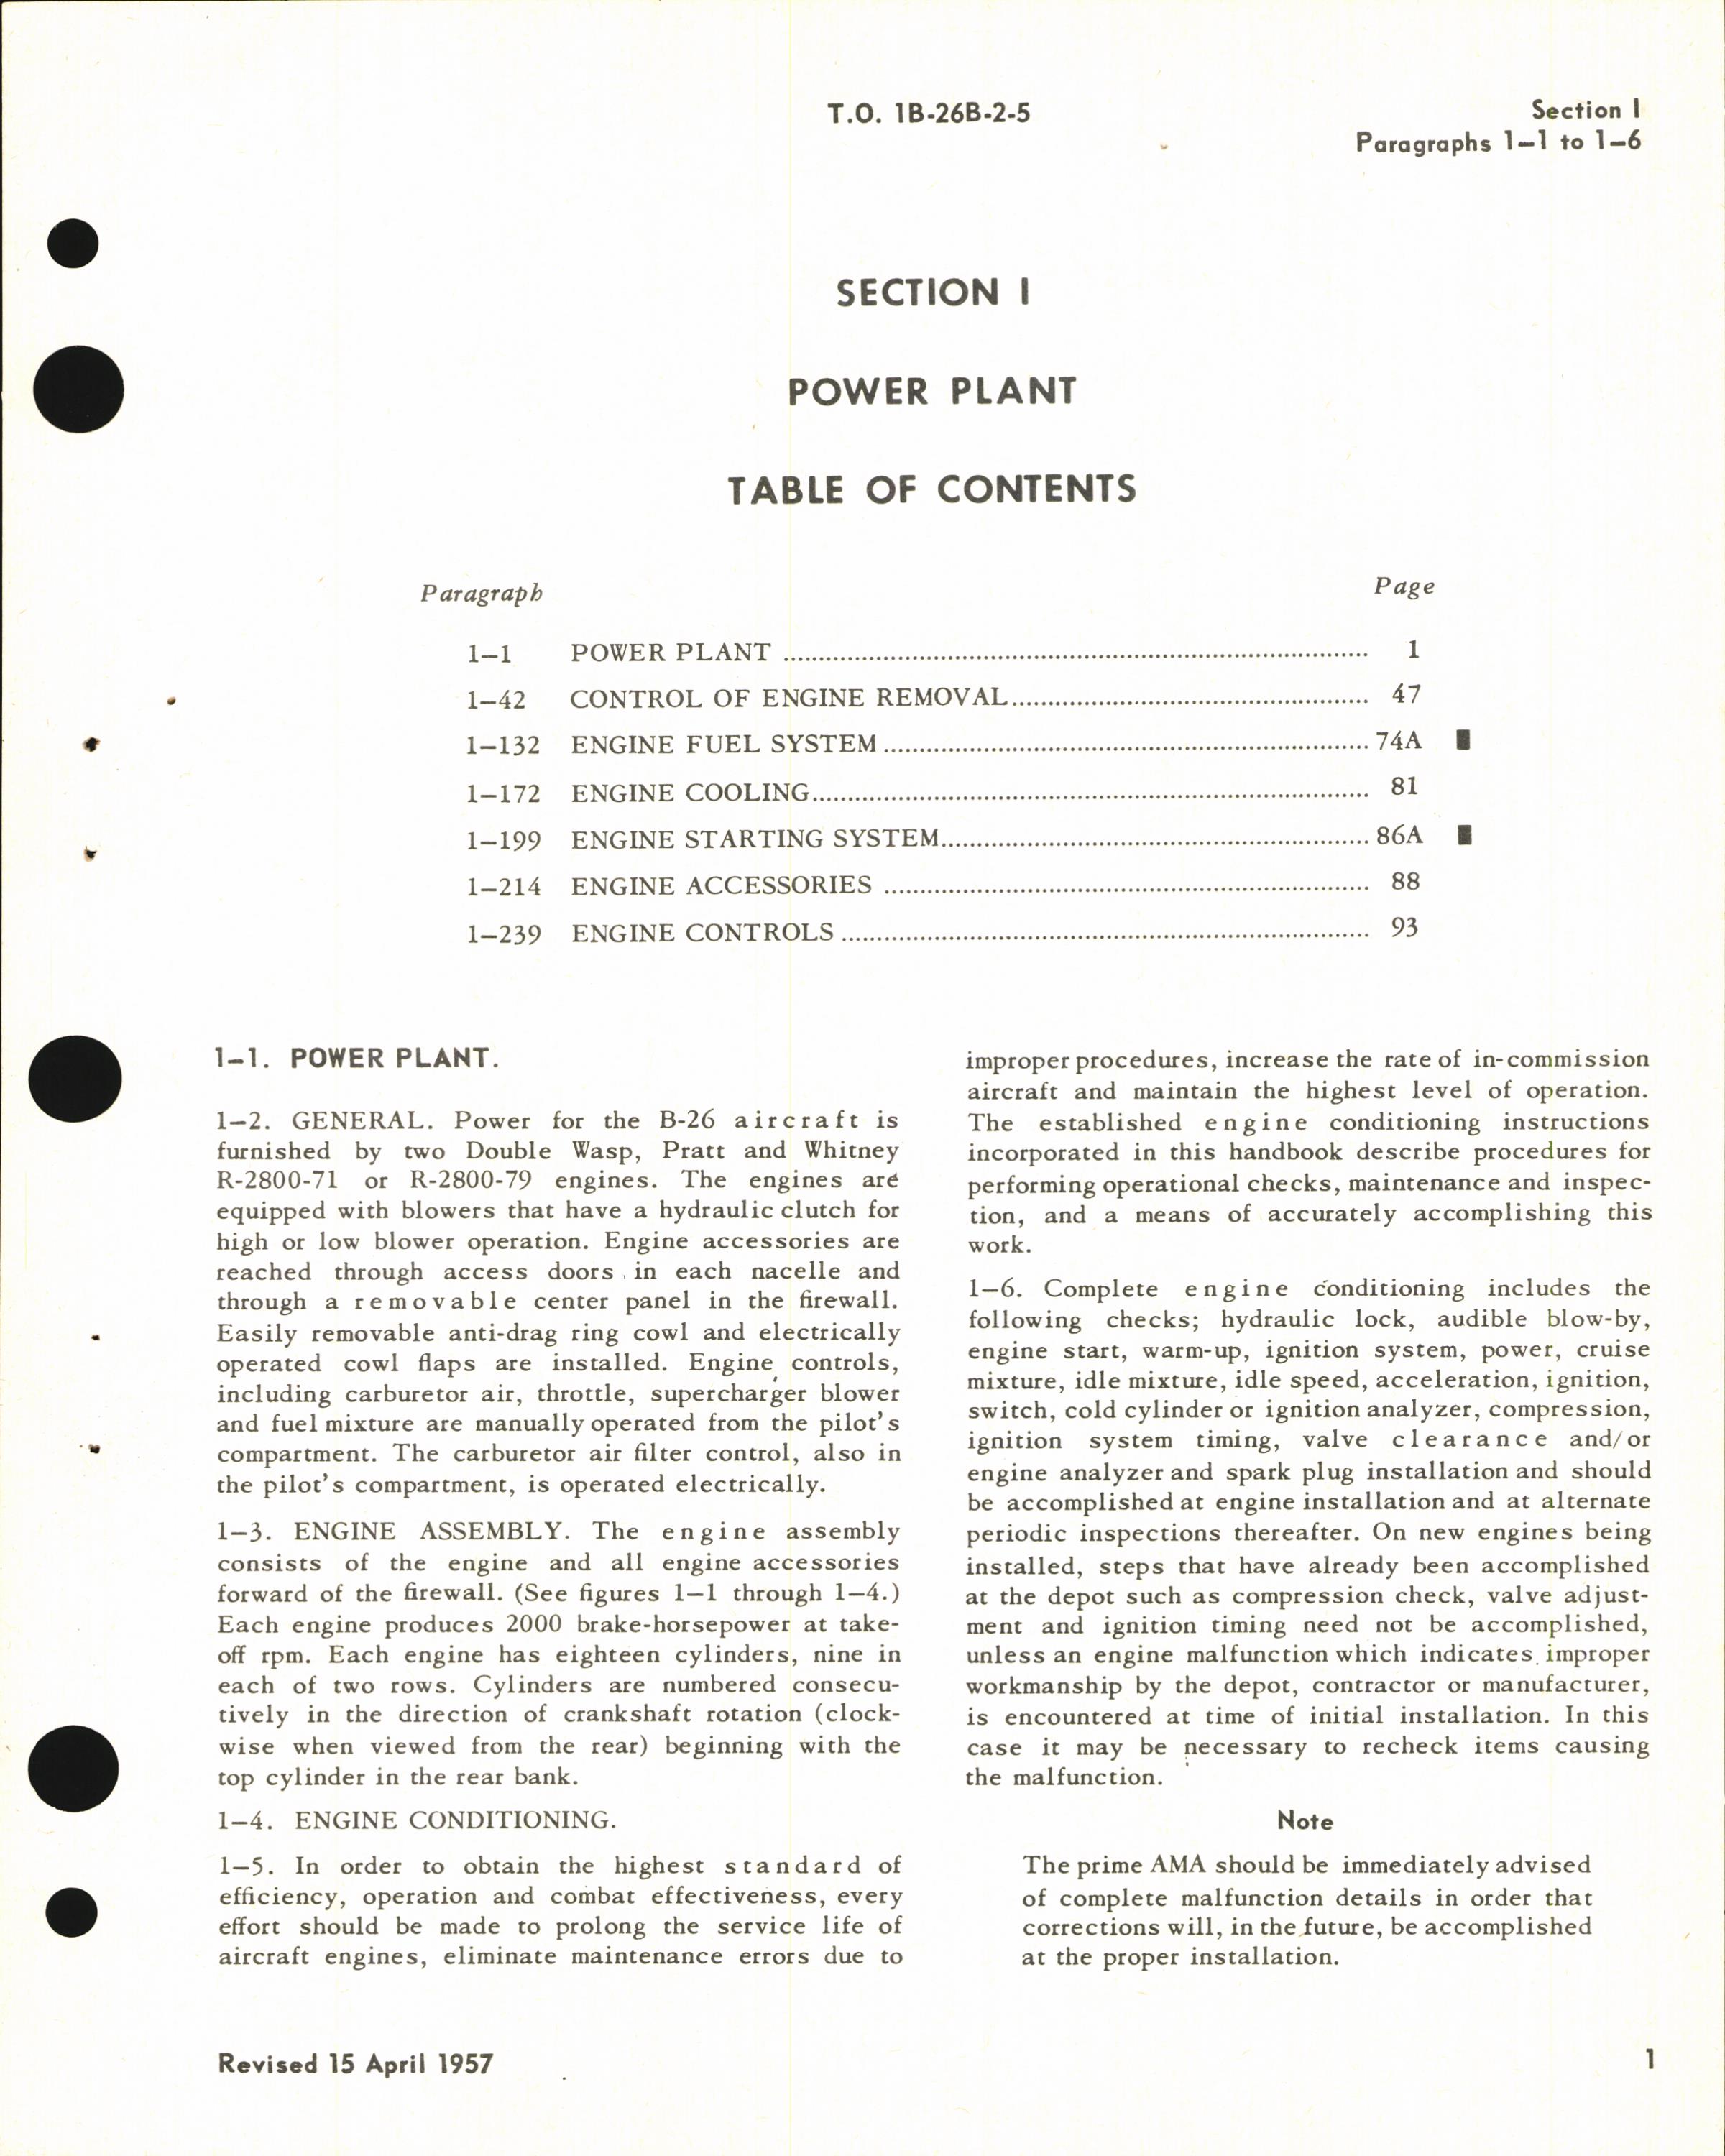 Sample page 7 from AirCorps Library document: Maintenance Instructions for B-26B, B-26C, TB-26B, TB-26C, and JD-1 - Power Plant & Related Systems